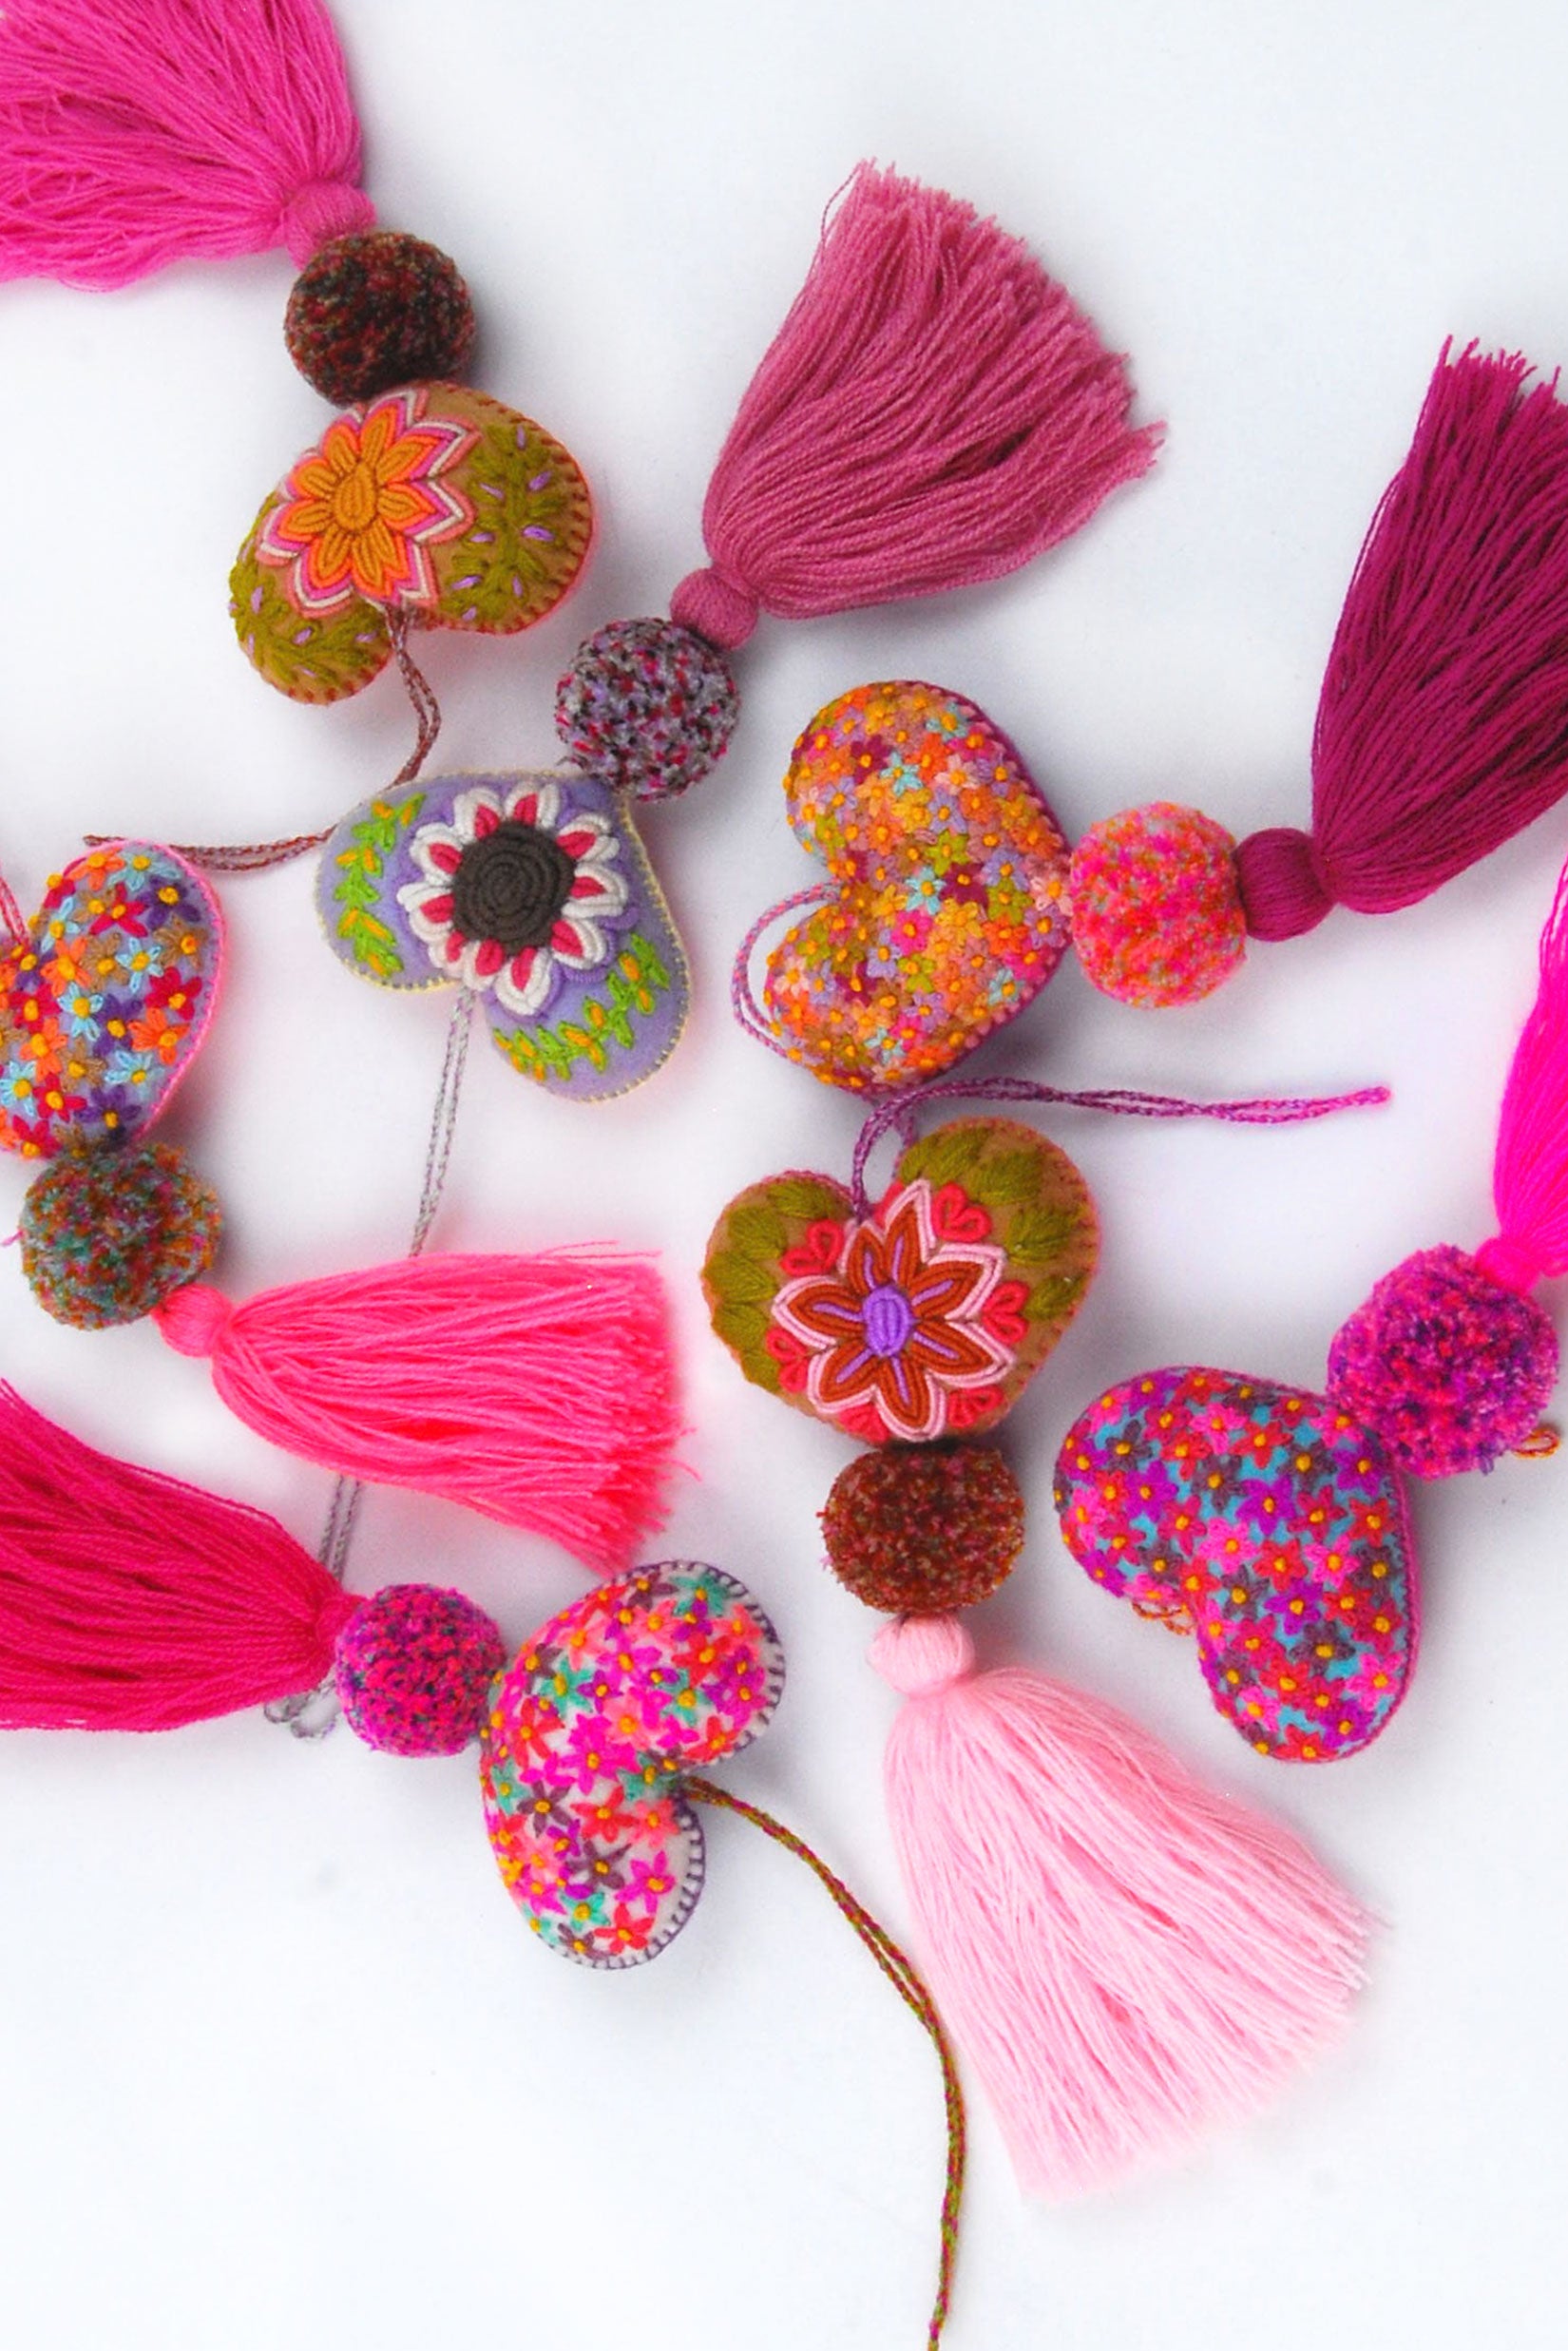 A scatter of colorful plush felt hearts adorned with flower embroidery attached by multicolor speckled pom poms to tassels in varying shades of pink. Each heart has a hanging string attached to the top of it.